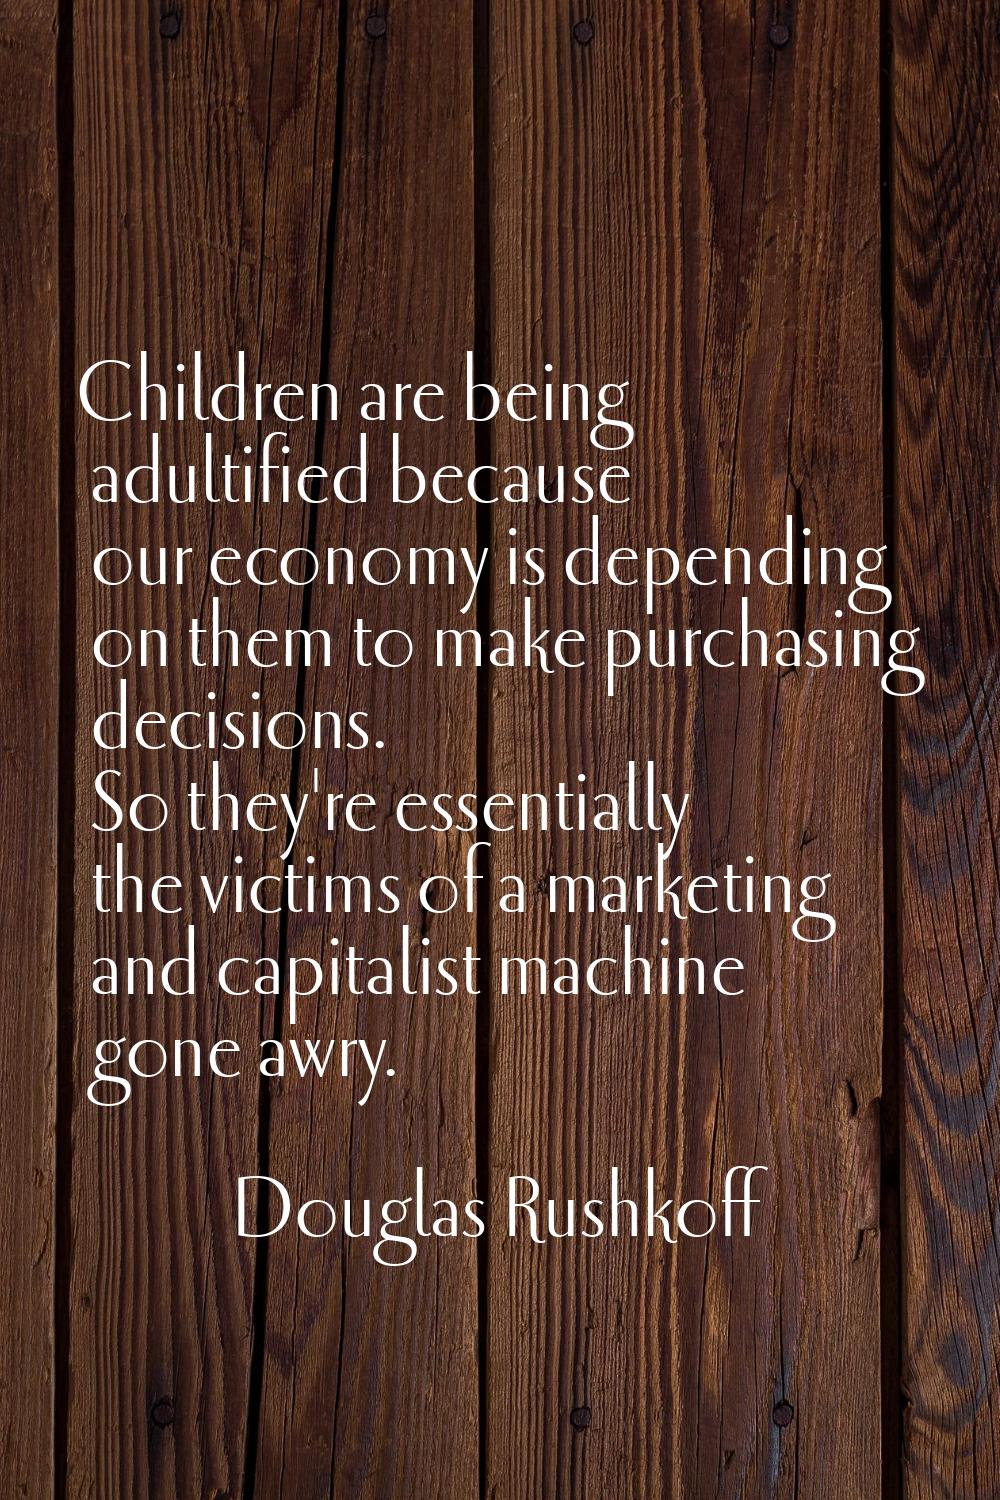 Children are being adultified because our economy is depending on them to make purchasing decisions